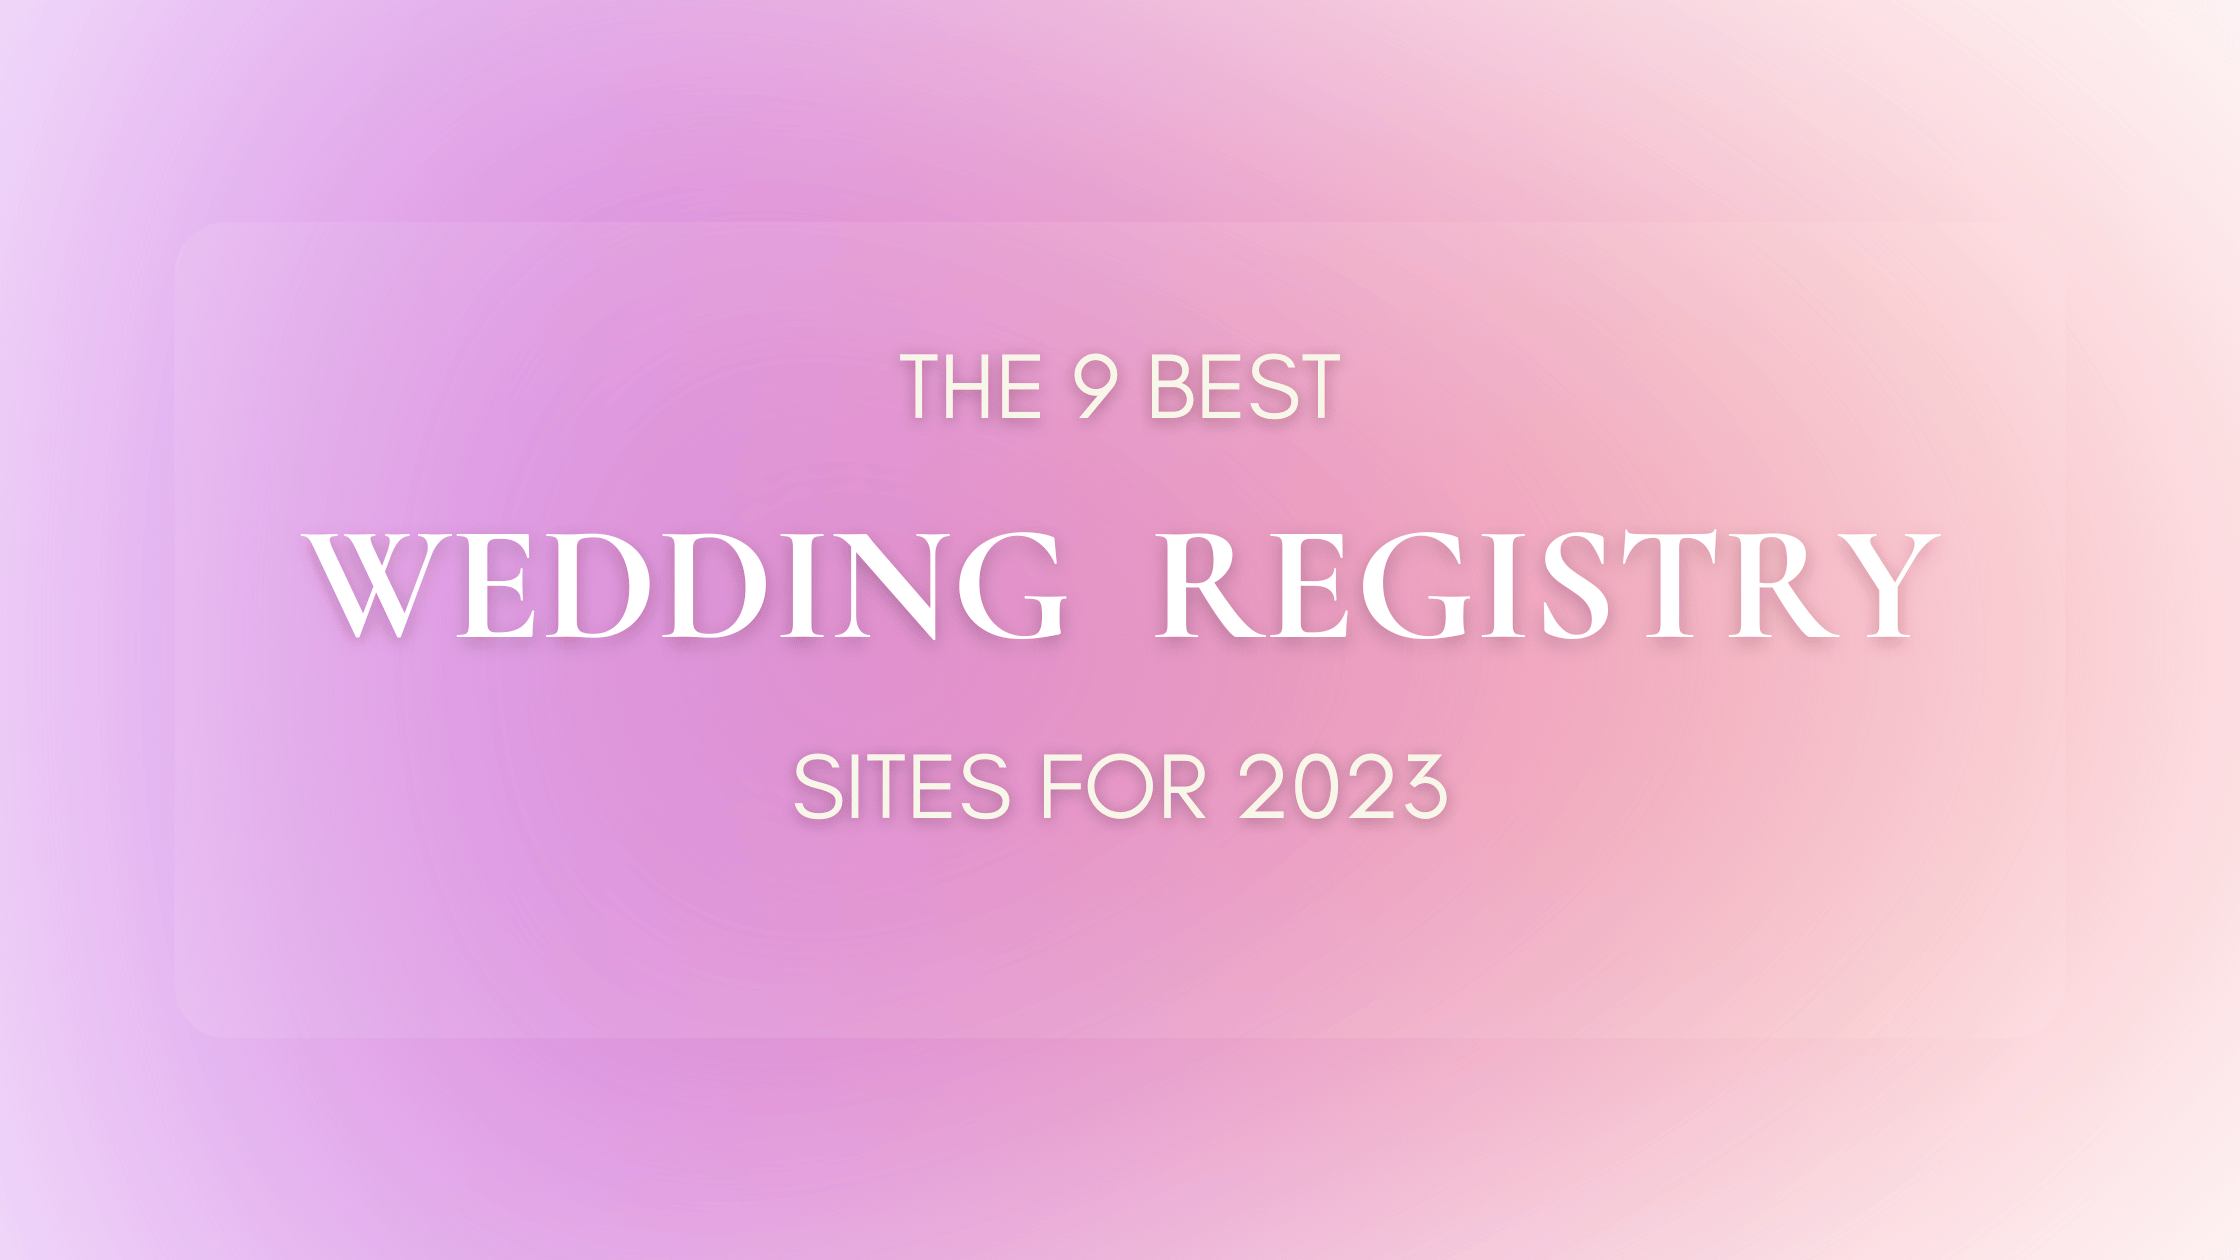 Top 130 Wedding Registry Ideas for 2023 (For Every Budget!) - Zola Expert  Wedding Advice